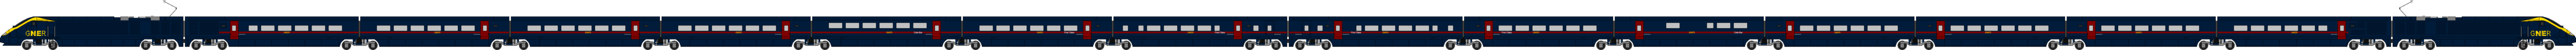 Illustration of a North of London set in GNER livery